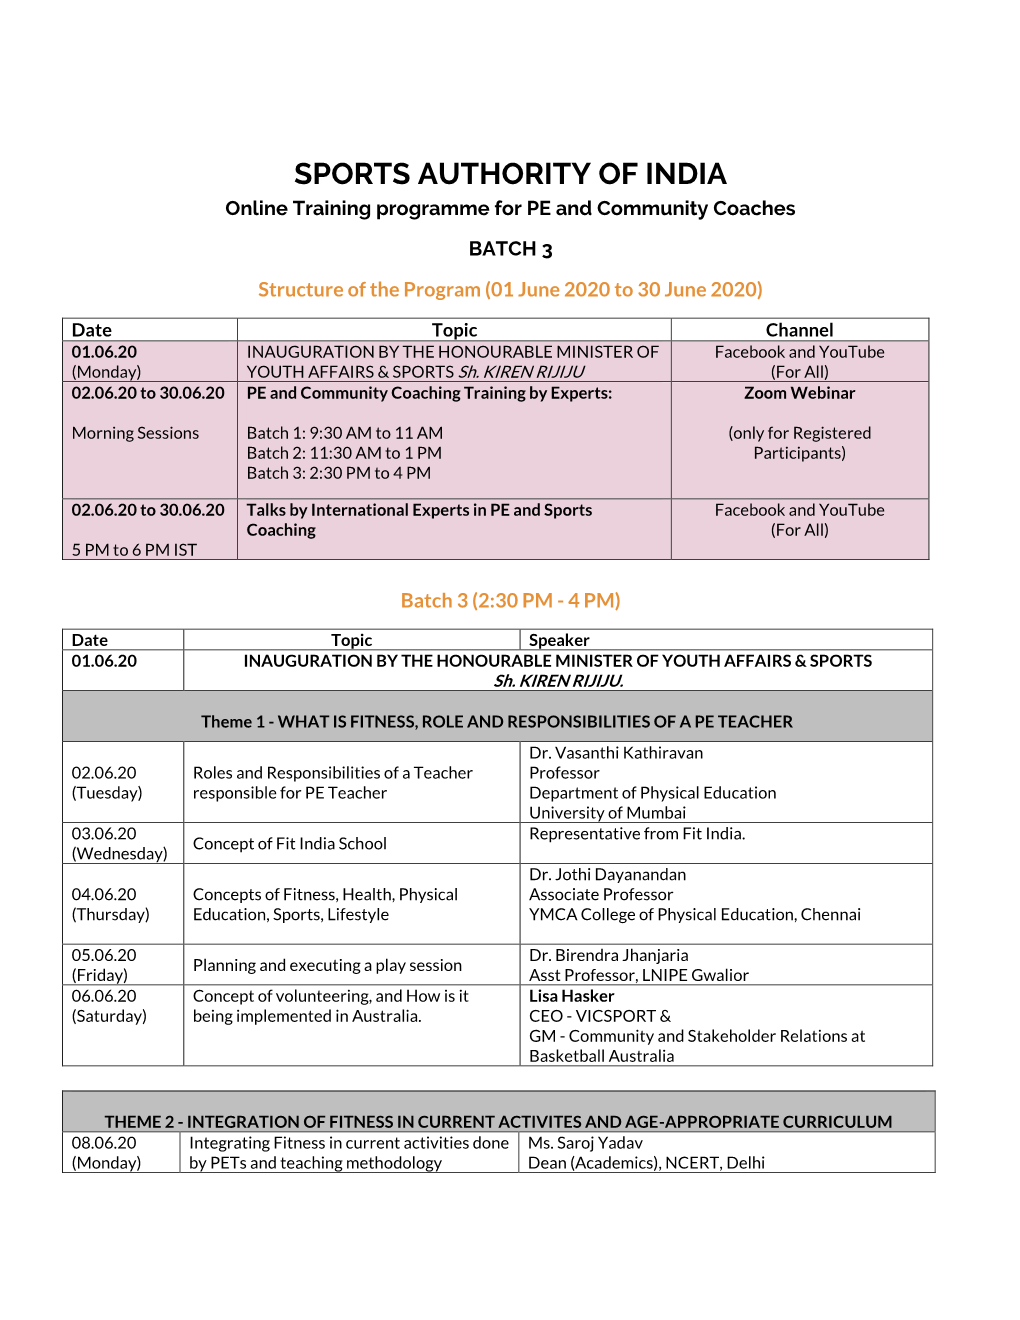 SPORTS AUTHORITY of INDIA Online Training Programme for PE and Community Coaches